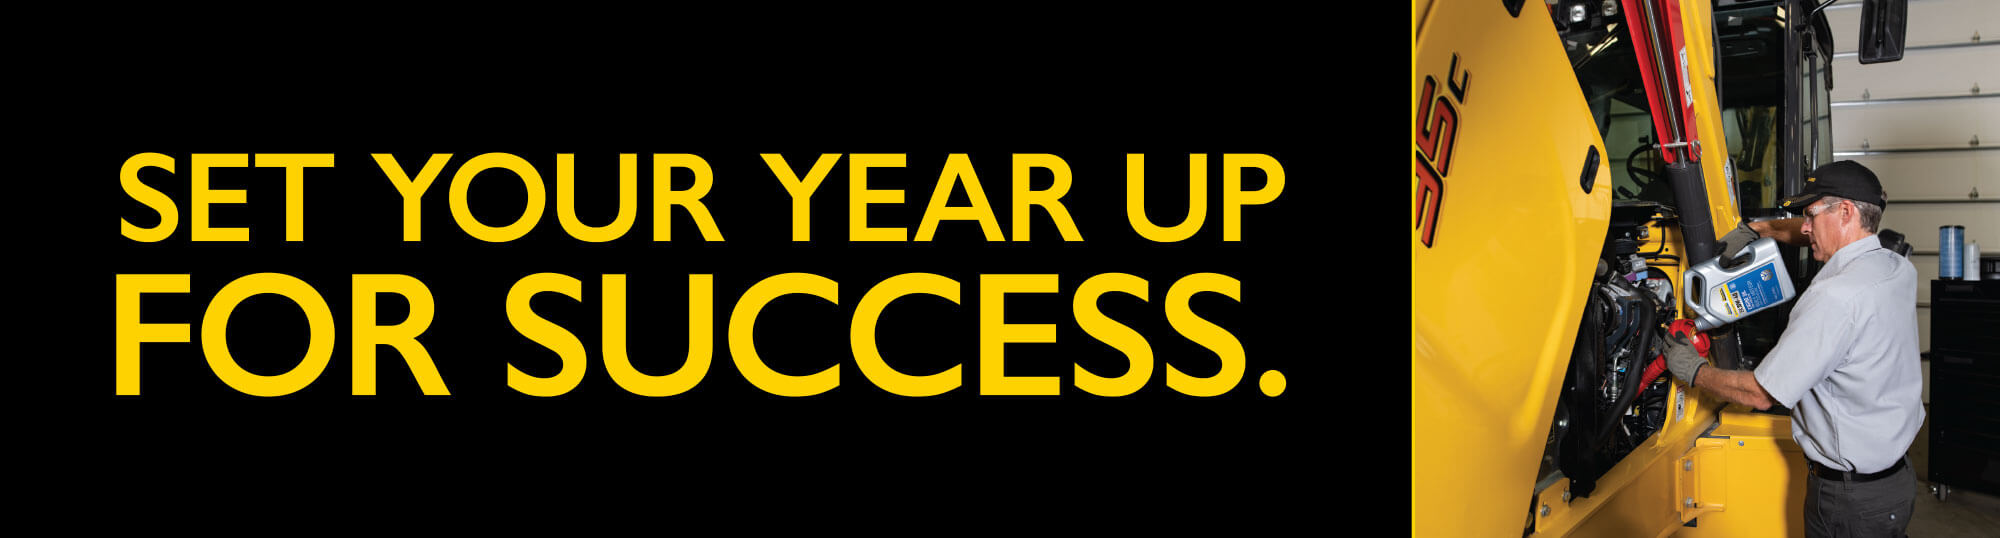 Set your year up for success.